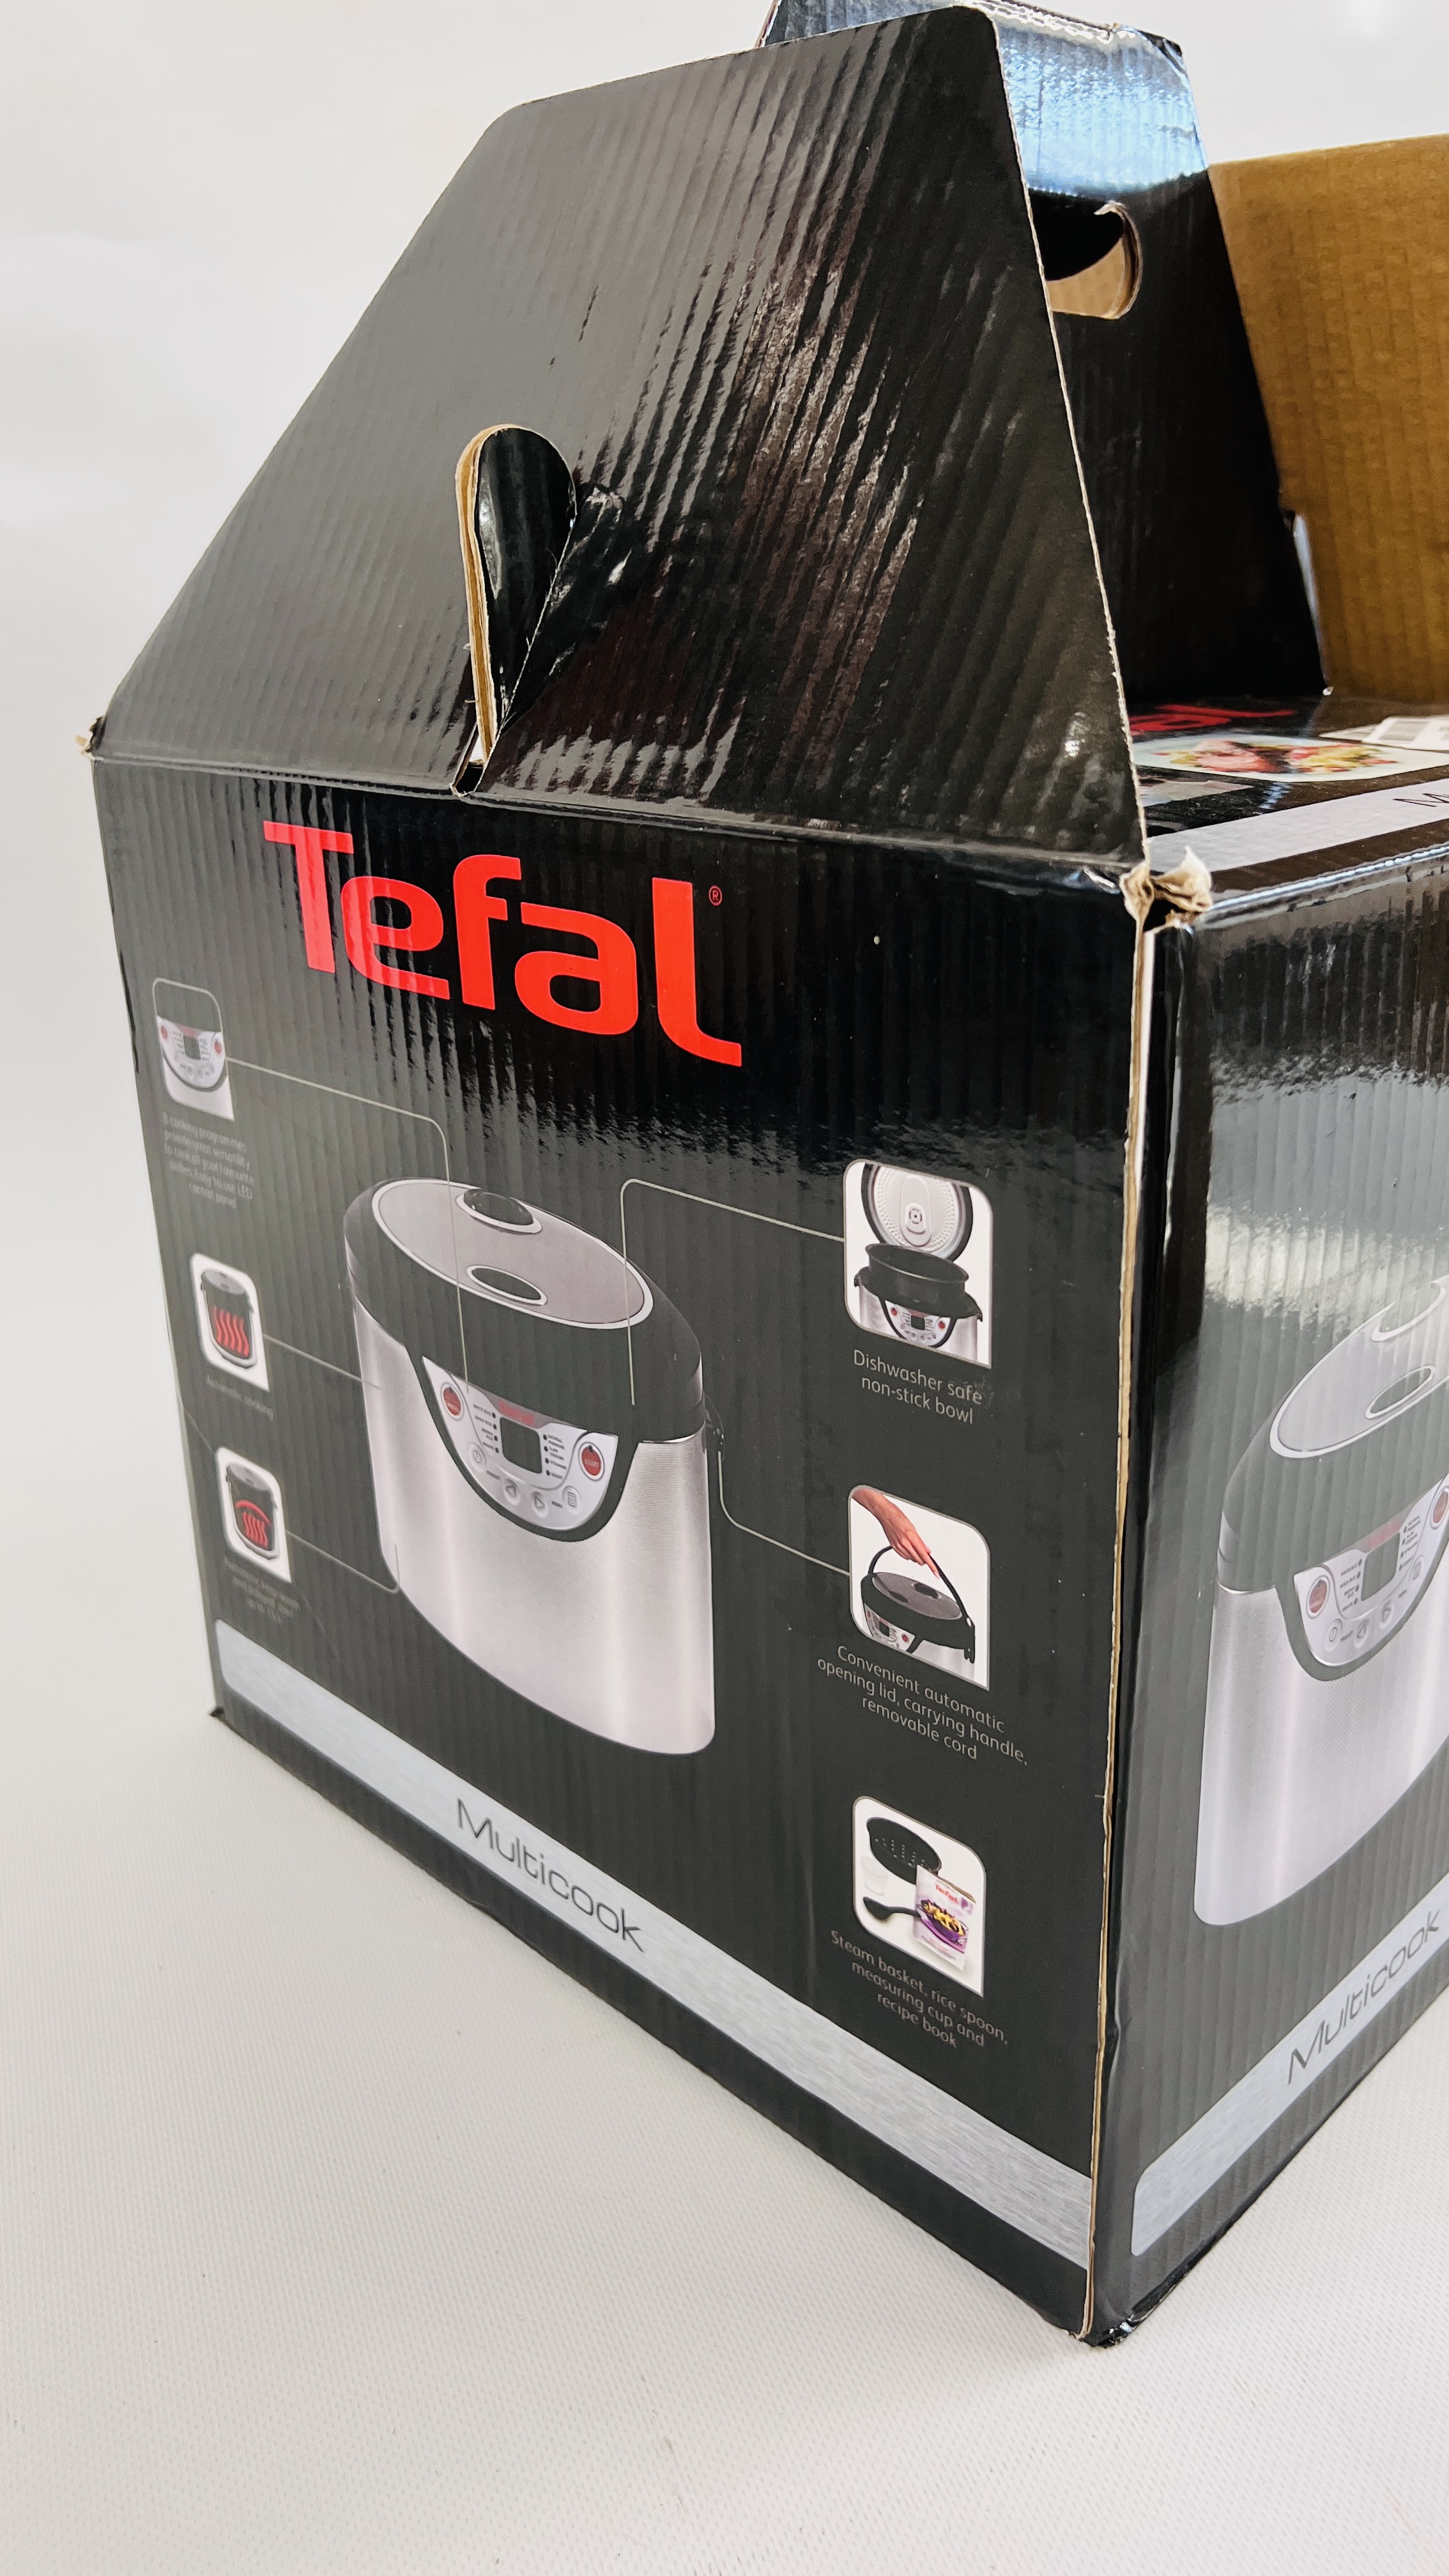 TEFAL MULTI COOK OVEN, BOXED UNUSED - SOLD AS SEEN. - Image 4 of 9